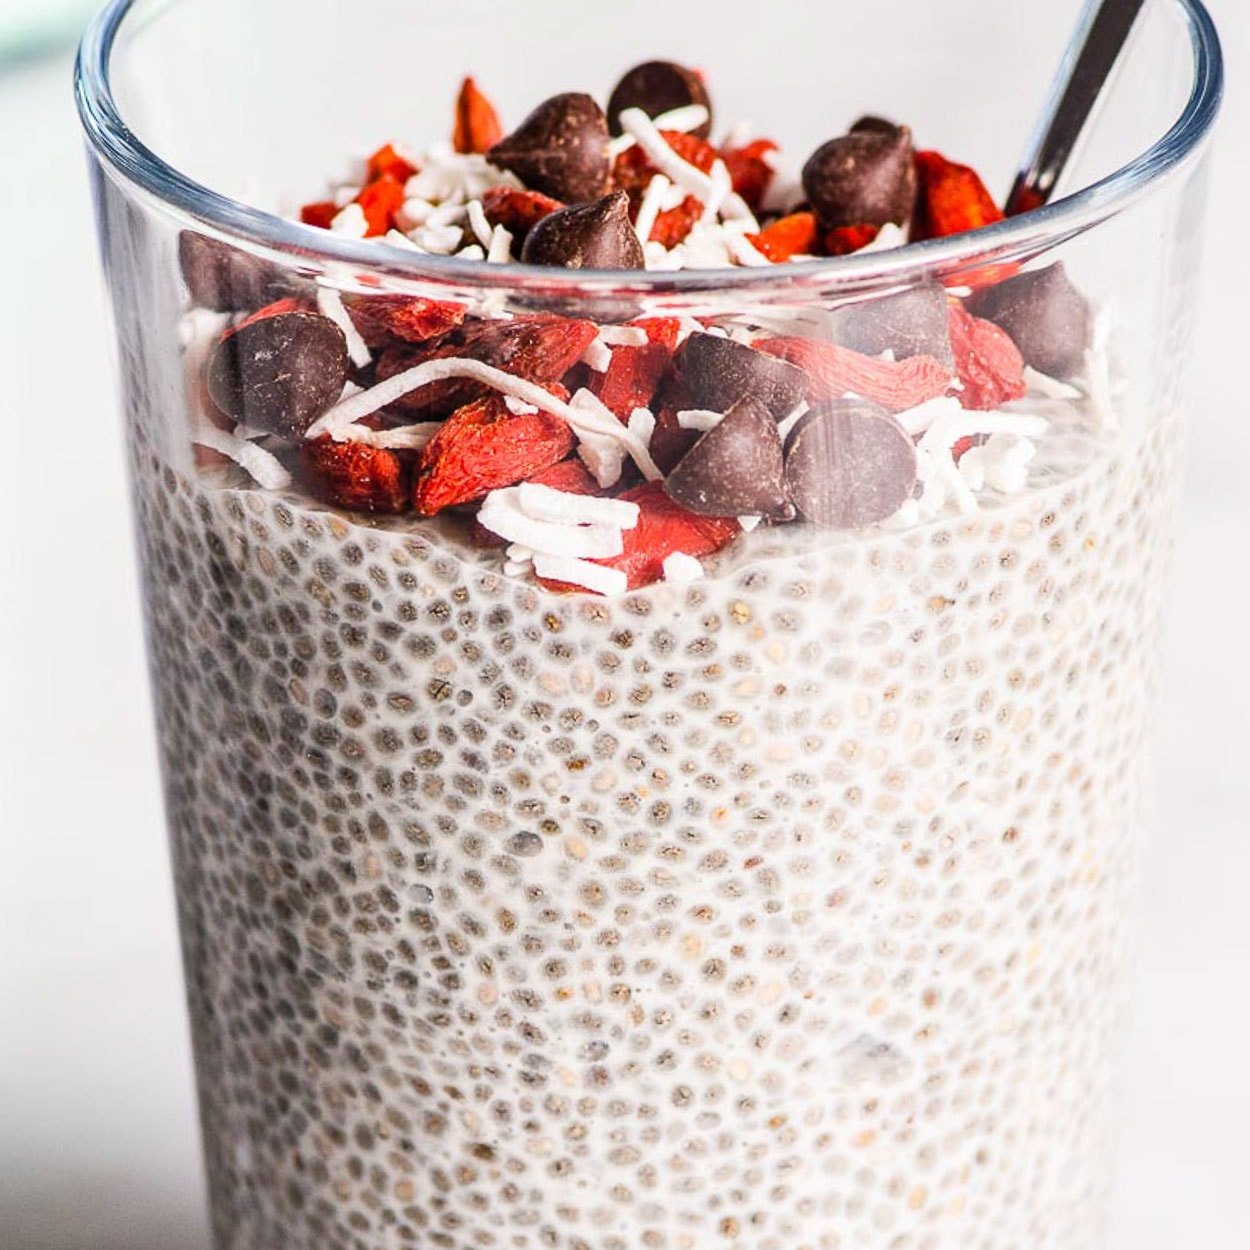 Overnight chia pudding in a glass with dried berries, chocolate chips and coconut flakes.